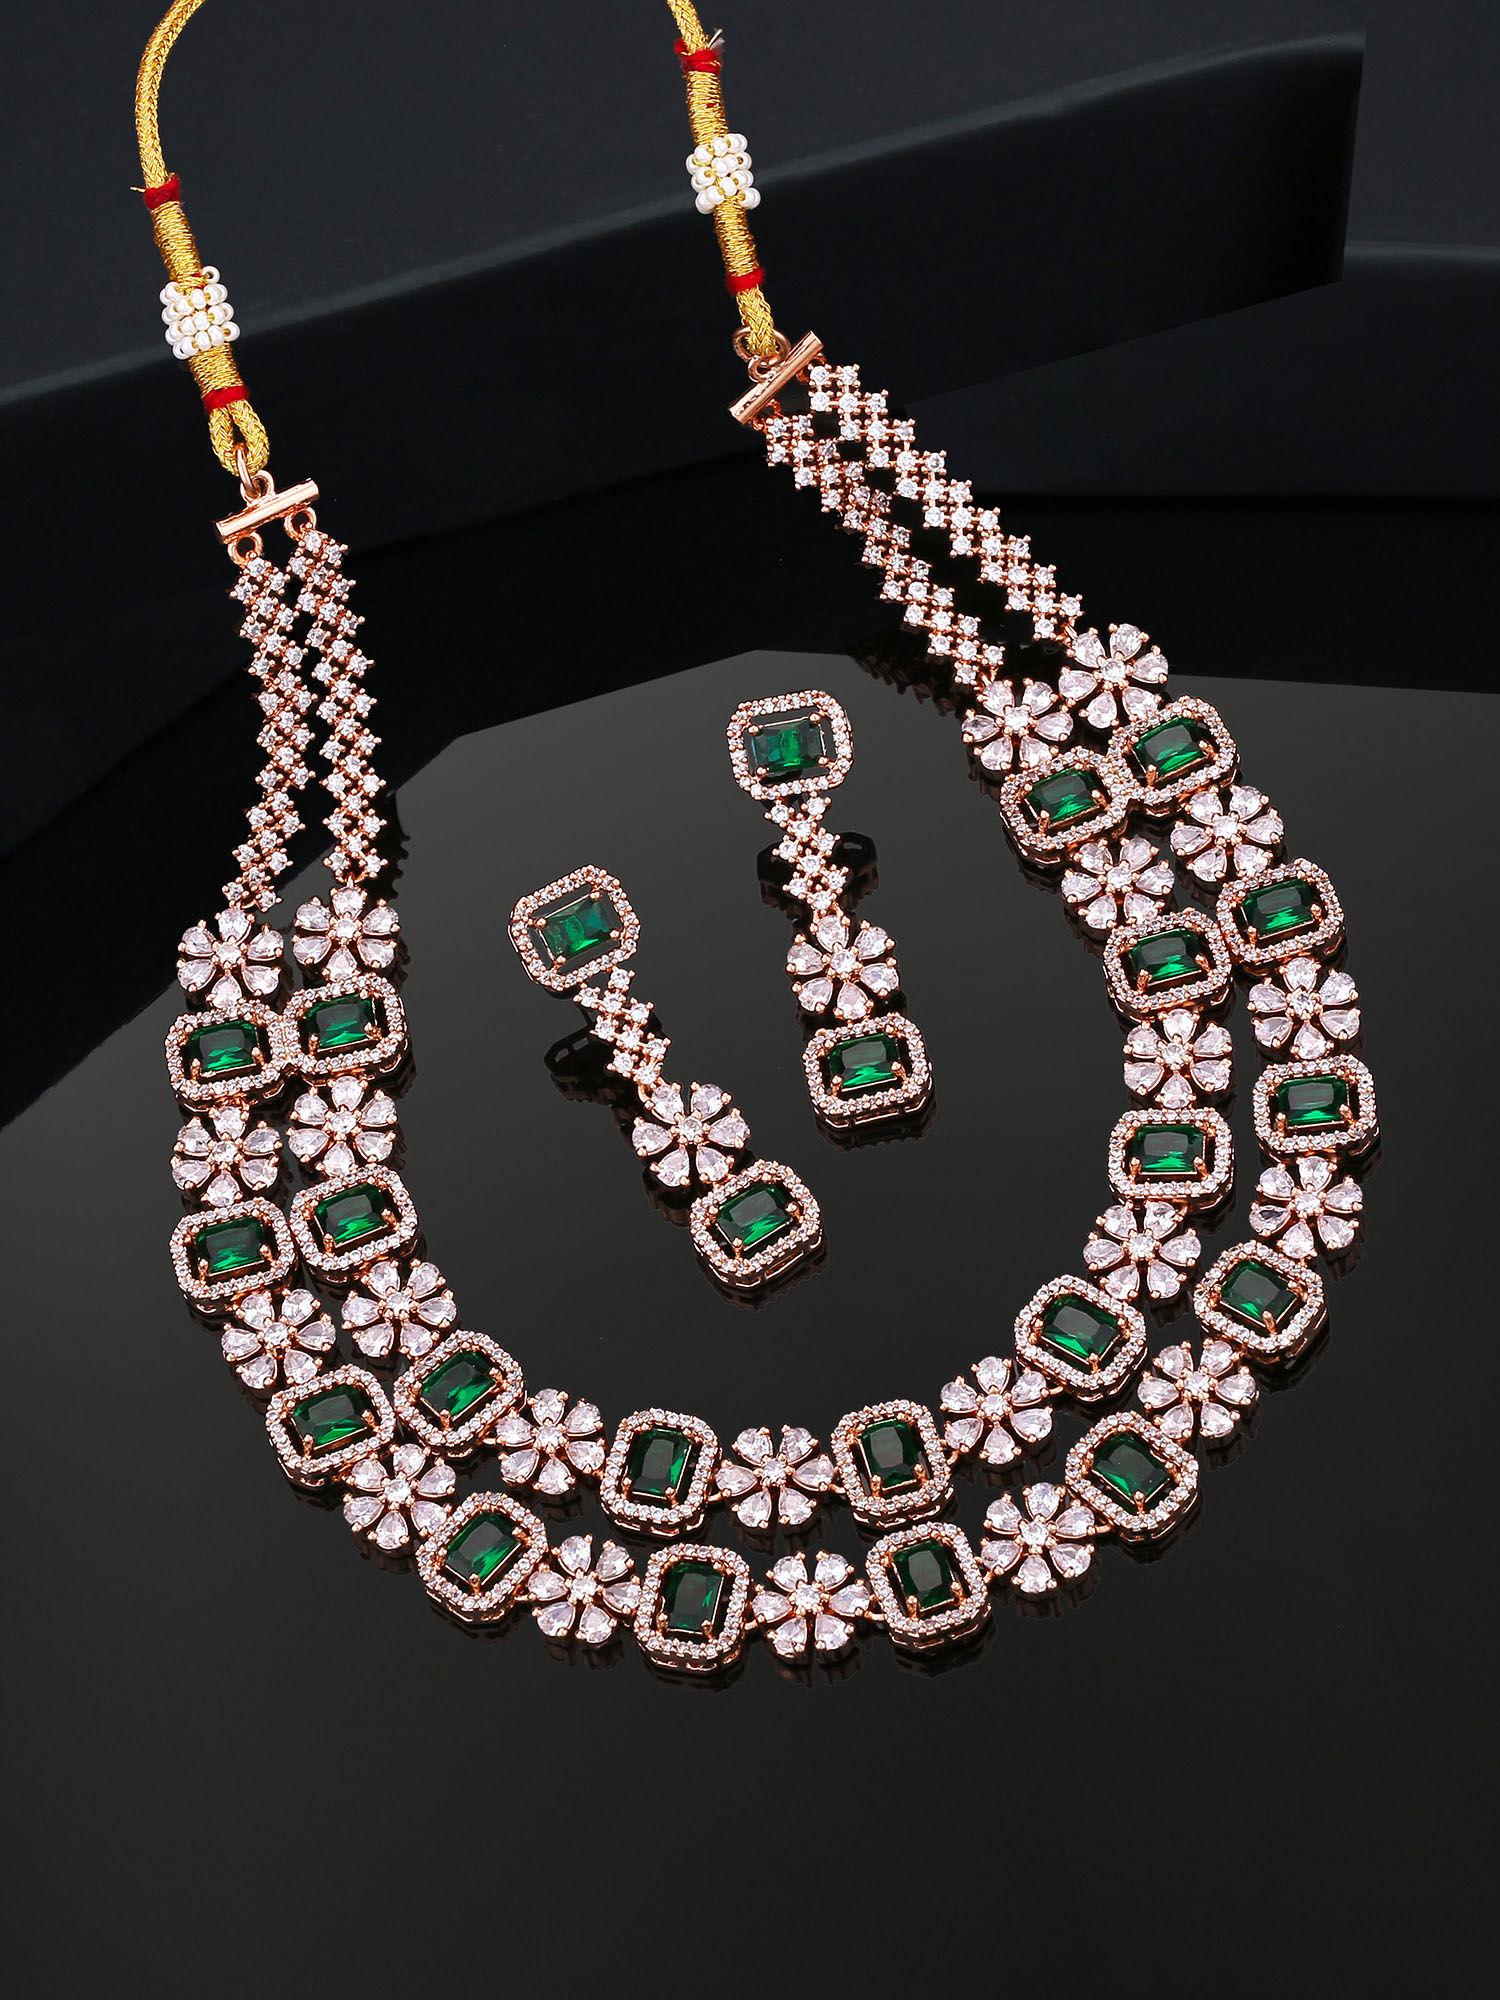 rose gold plated cz dazzling double layered necklace set with green crystals